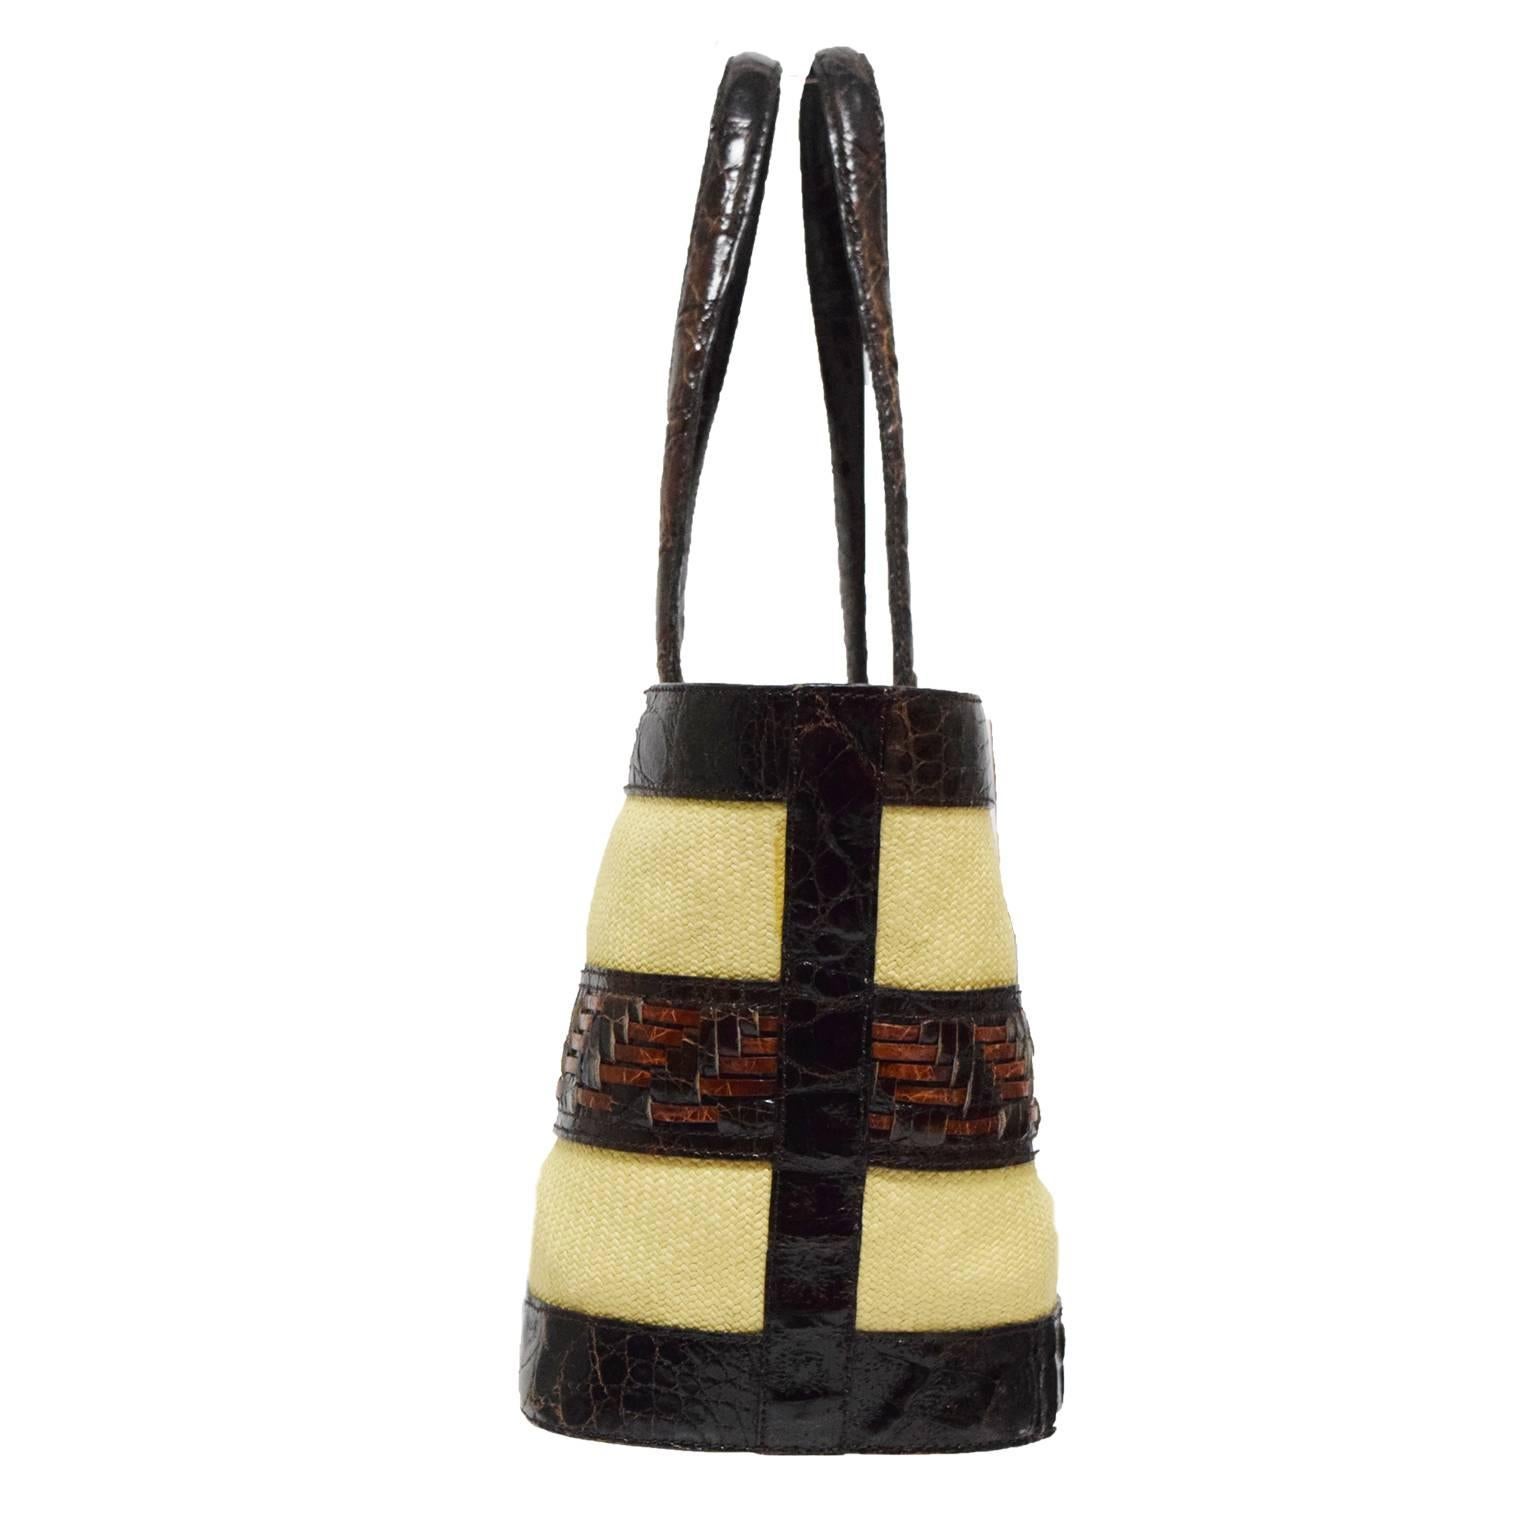 This Nancy Gonzalez Croc Tote is made from real dyed Crocodile, natural straw in chocolate brown and beige and are basket weaved to create this structured tote. Strap Drop 12 inches. 